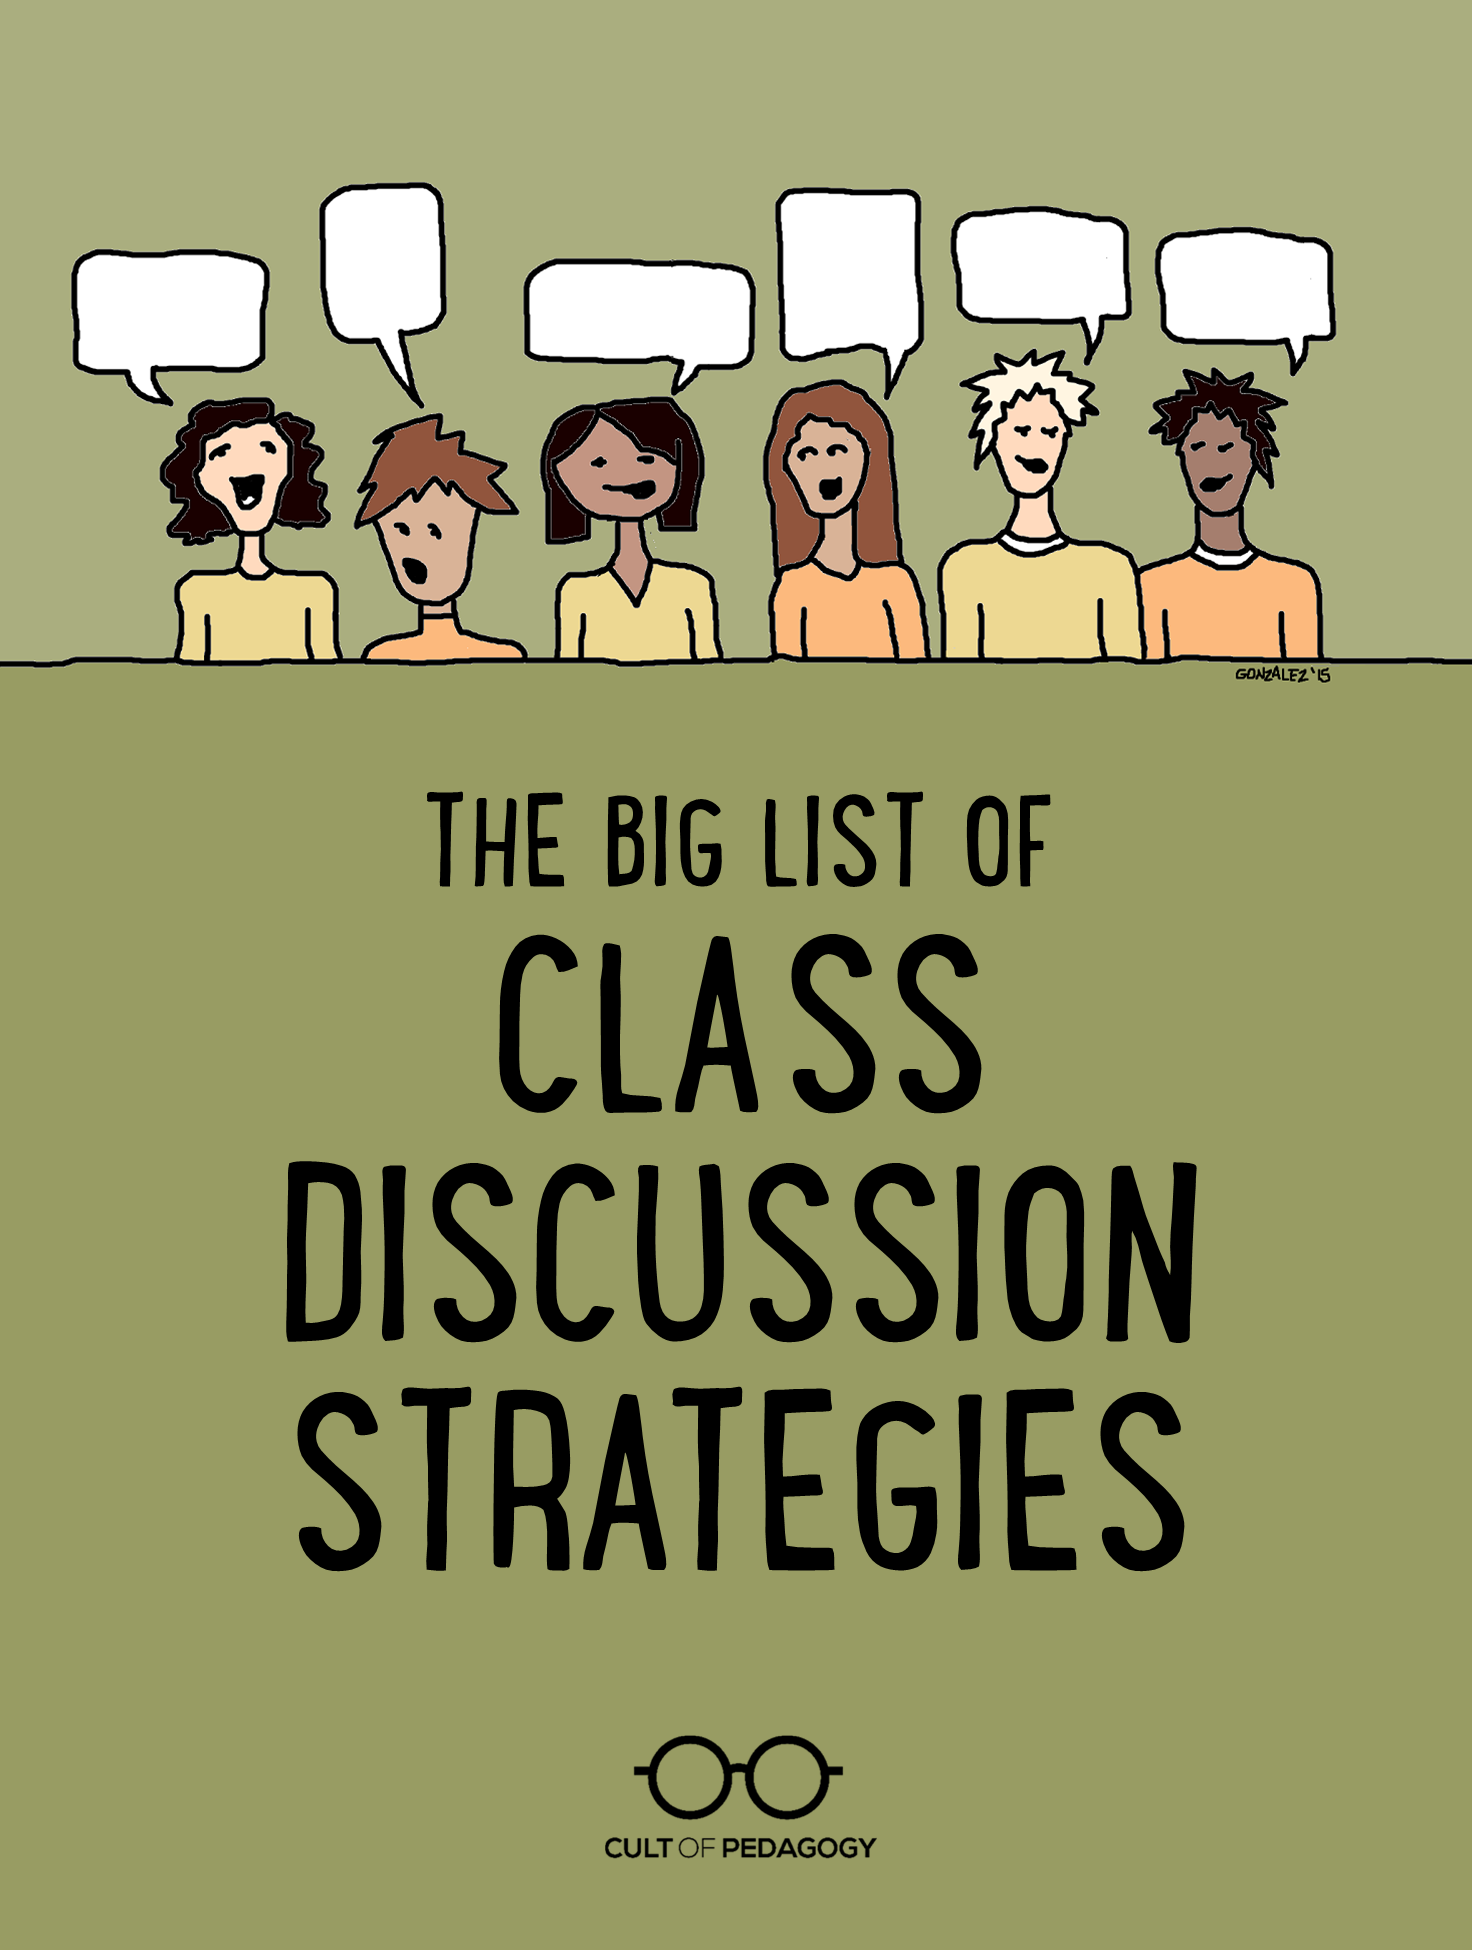 The Big List of Class Discussion Strategies